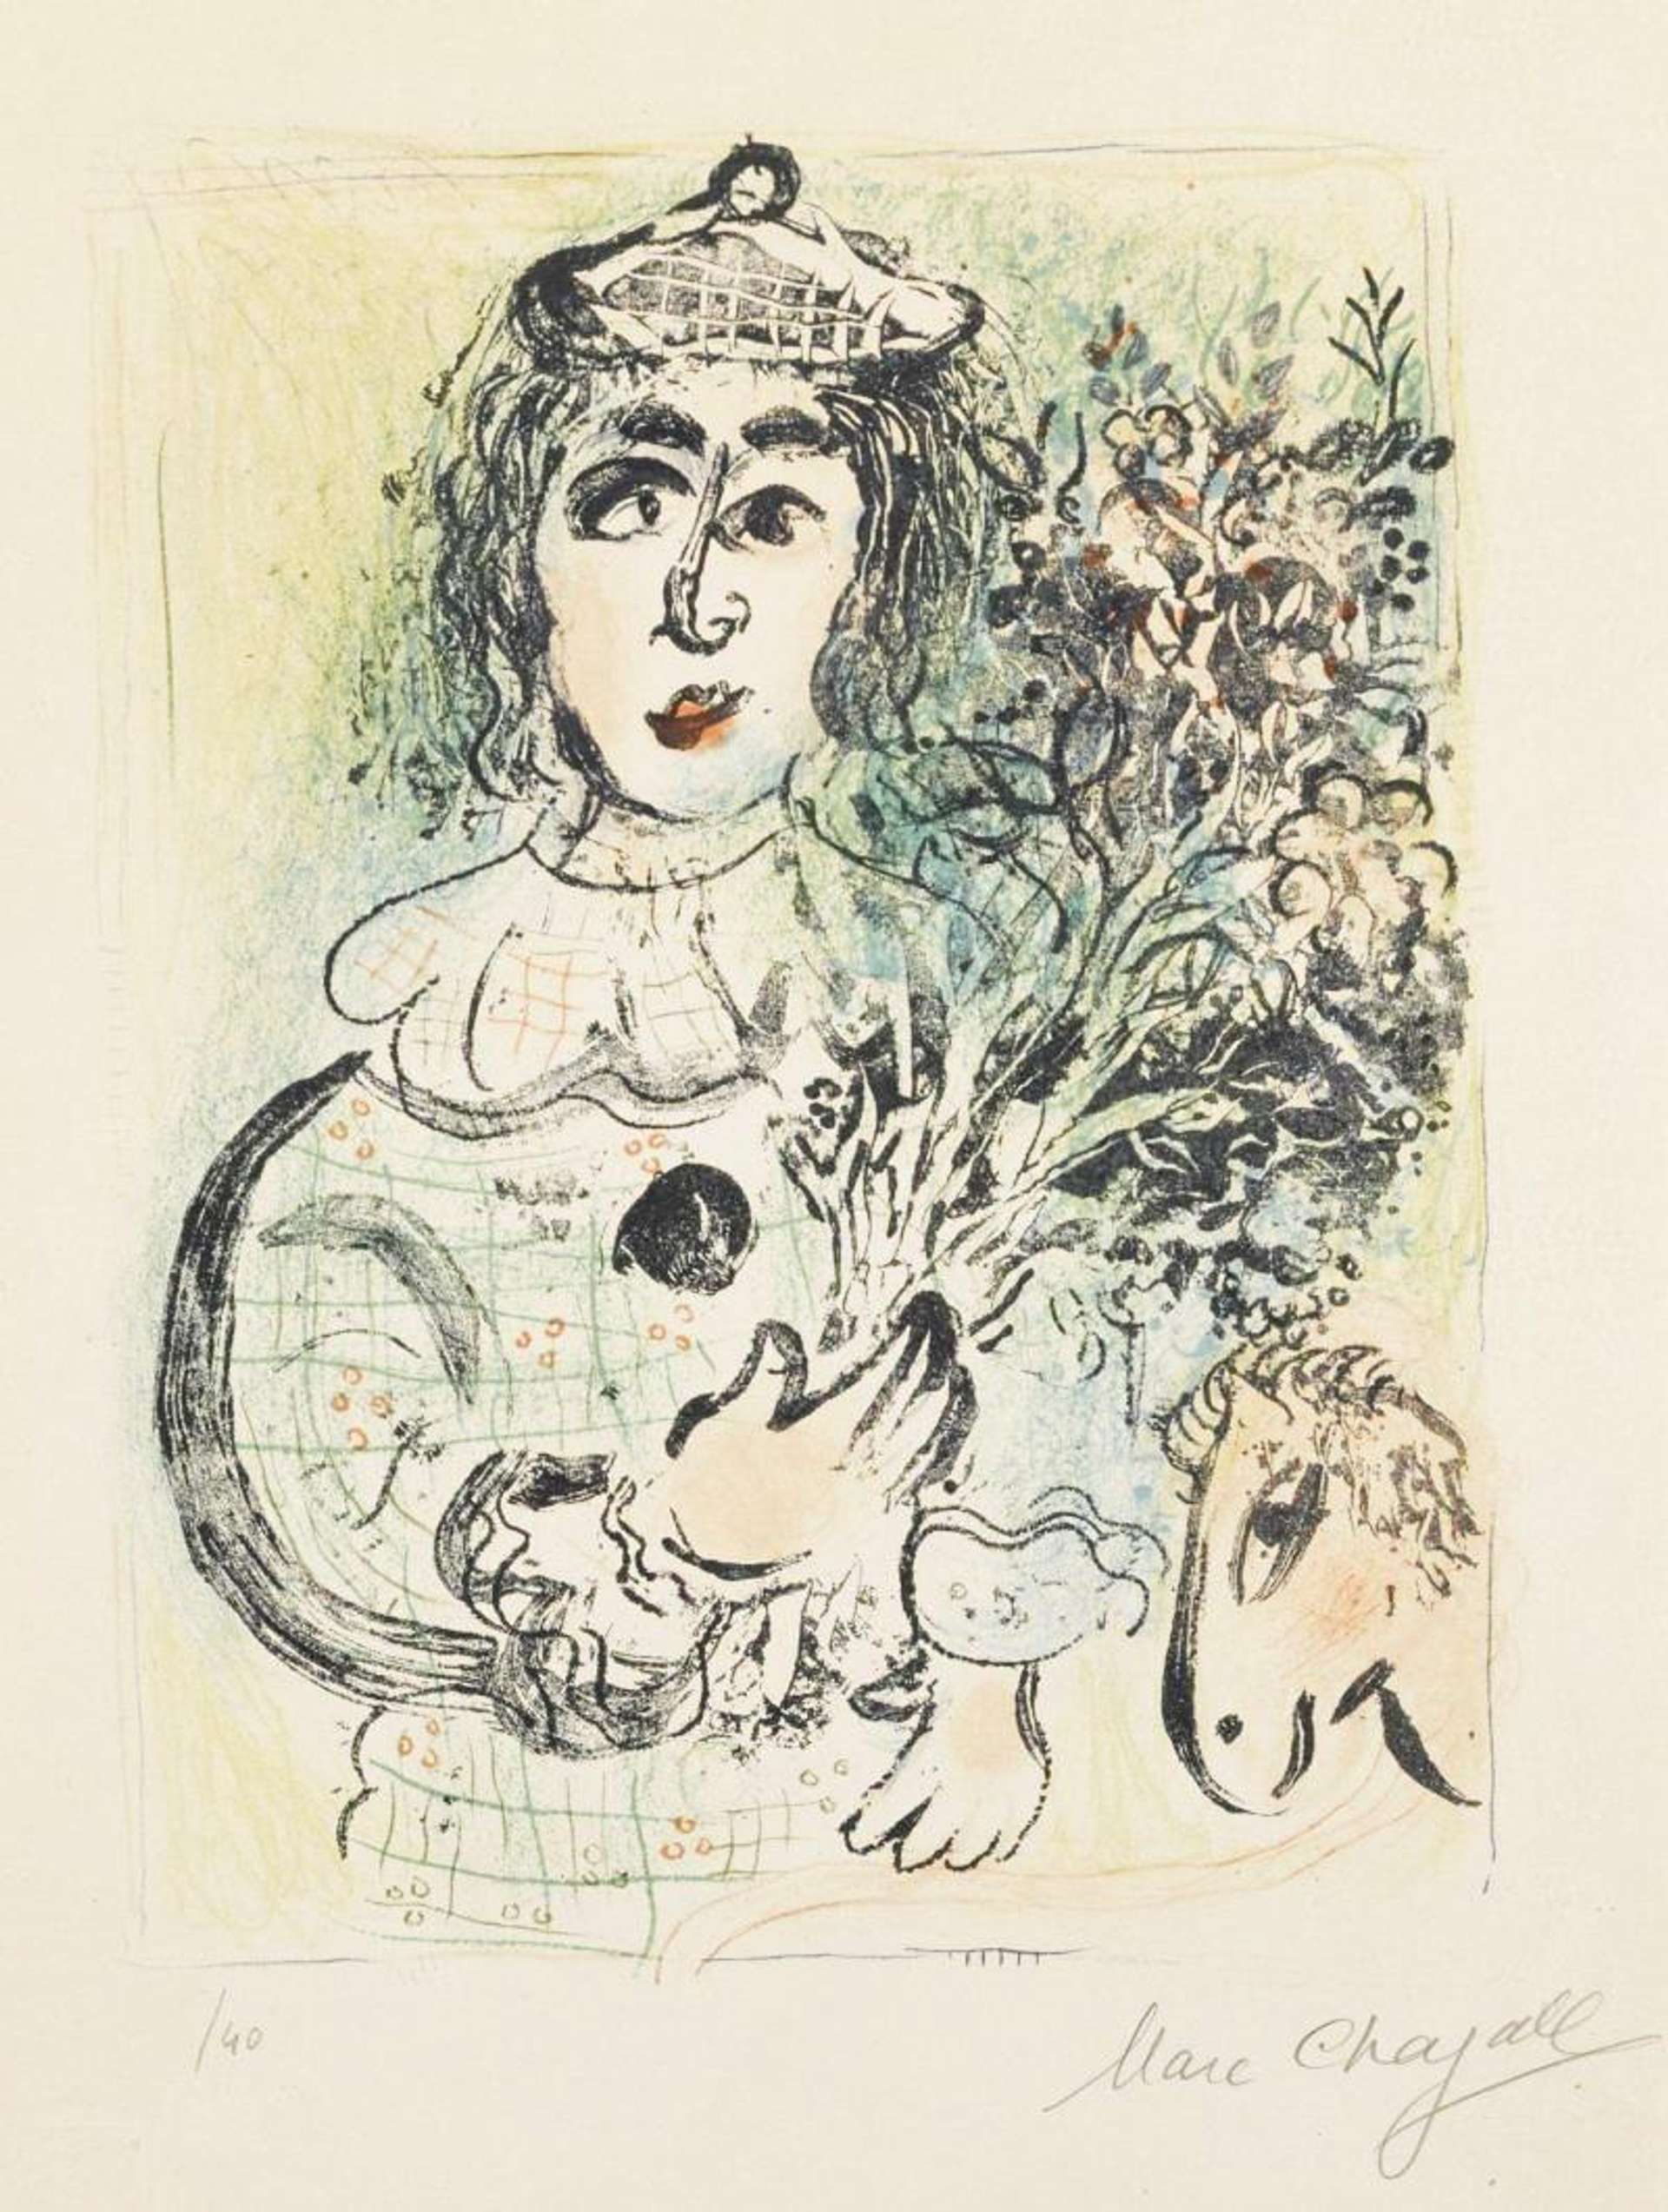 Marc Chagall: The Clown With Flowers - Signed Print